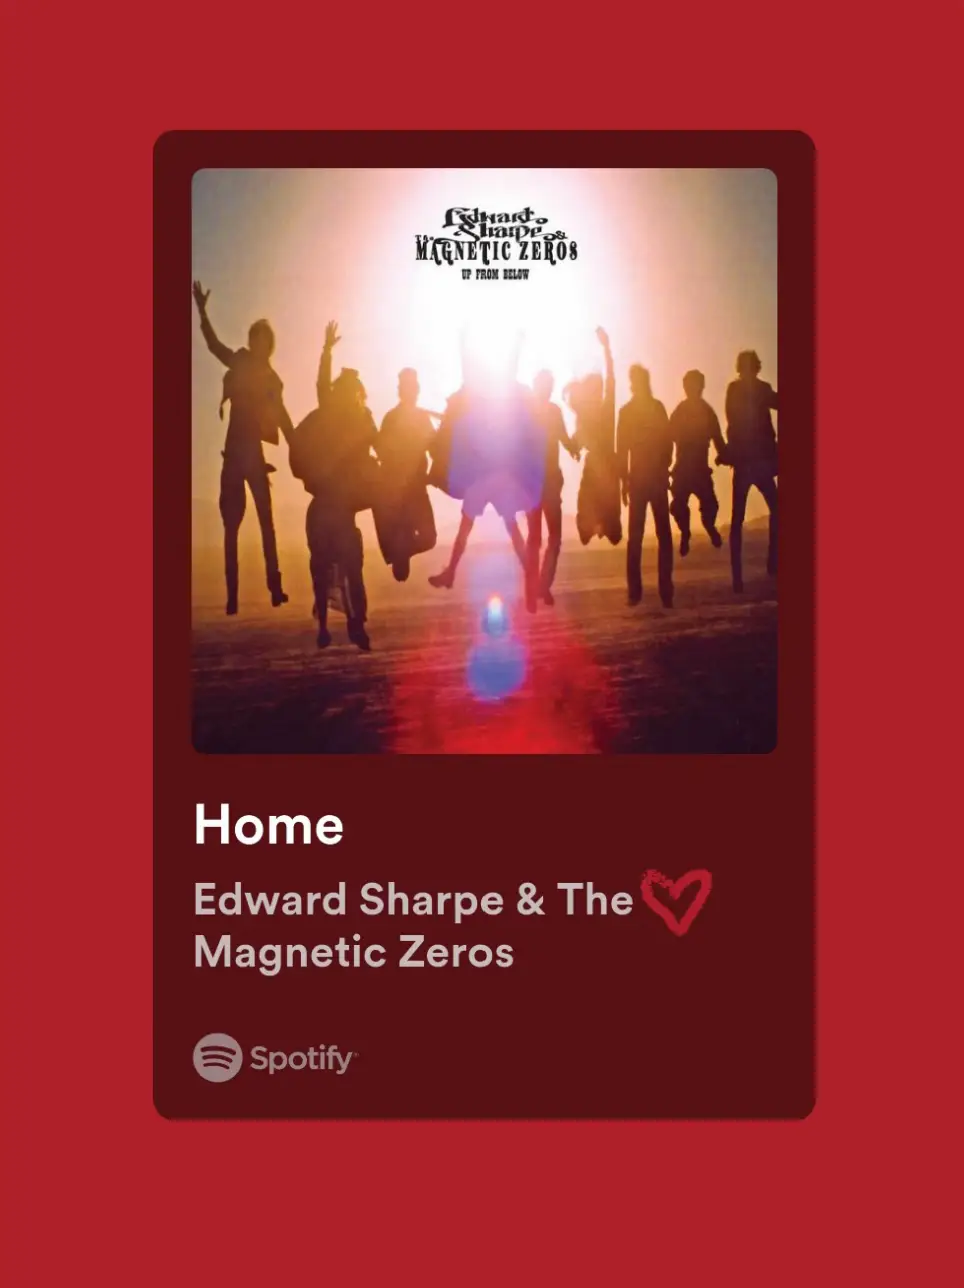  A Spotify ad for the album Home.